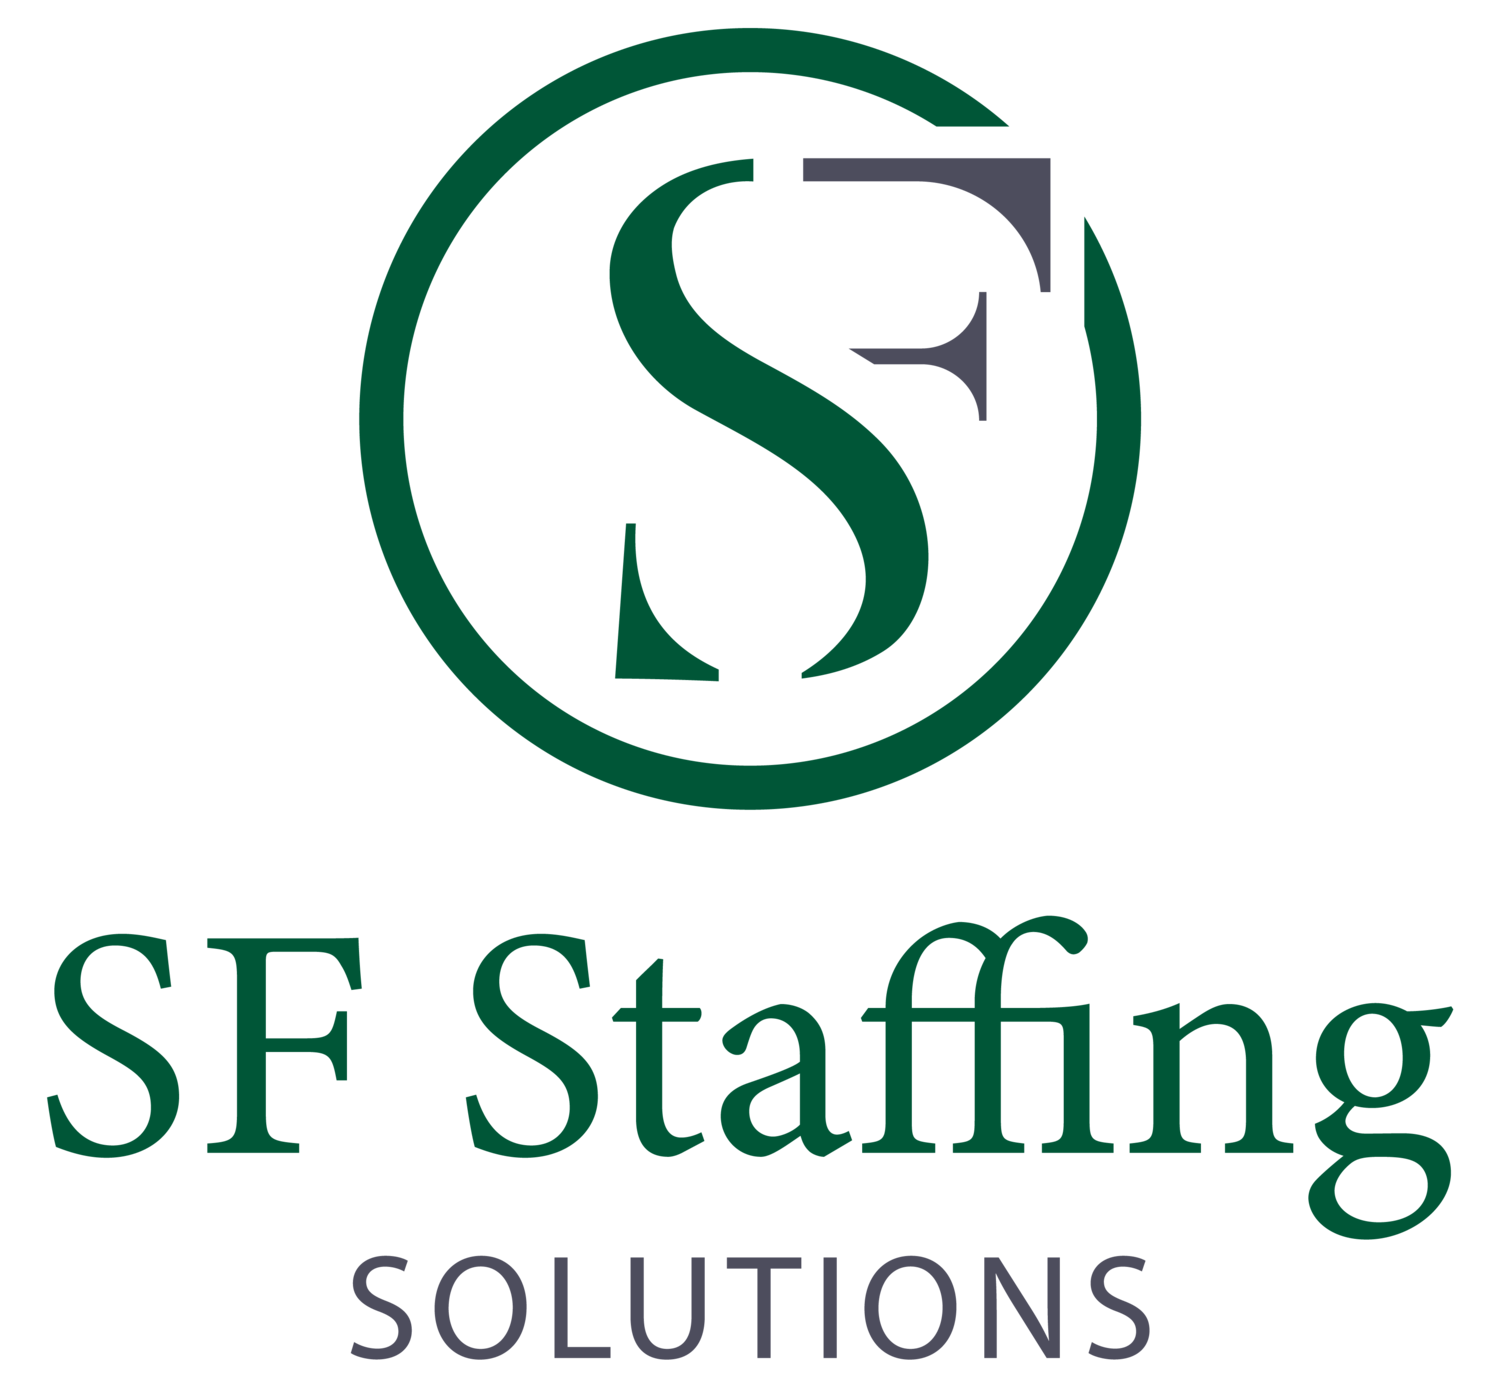 SF Staffing Solutions